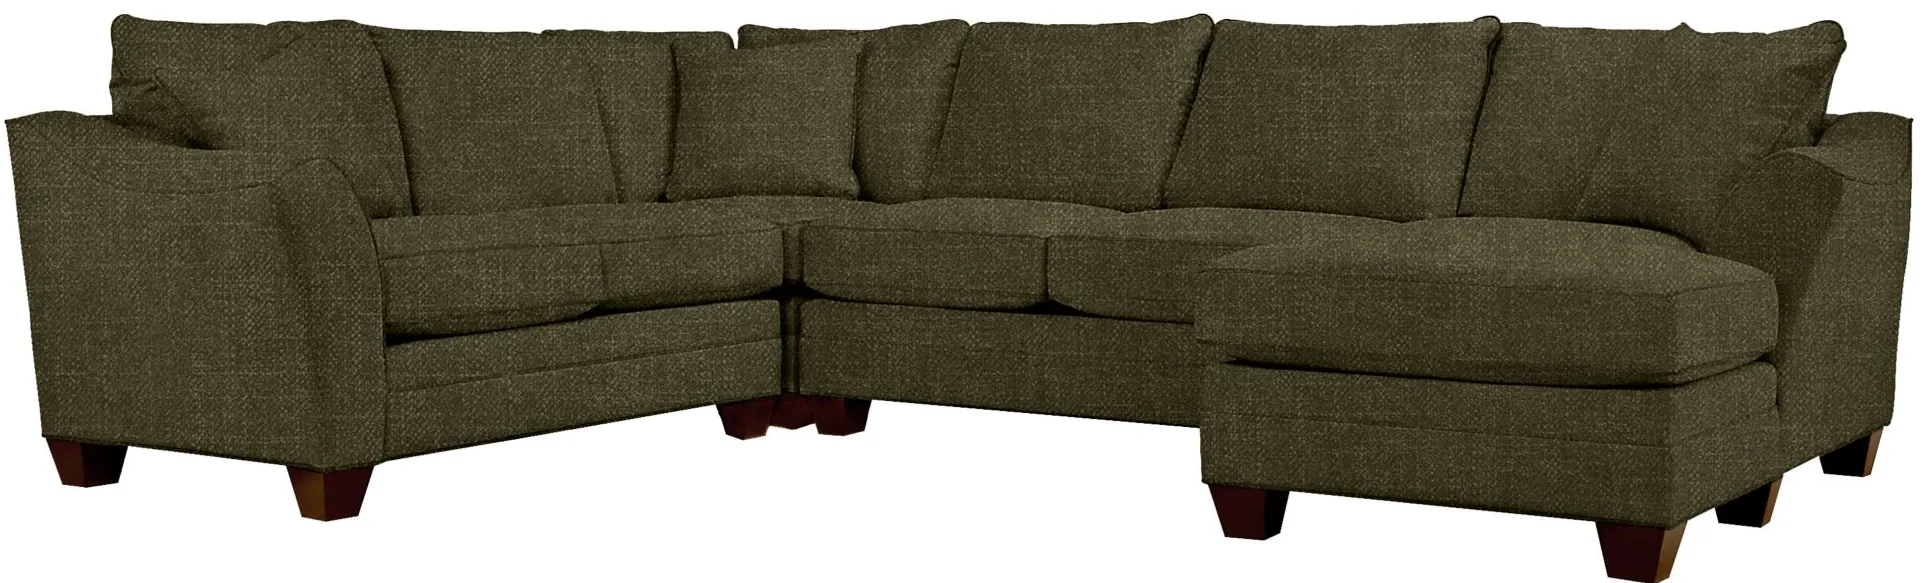 Foresthill 4-pc. Sectional w/ Right Arm Facing Chaise in Elliot Avocado by H.M. Richards